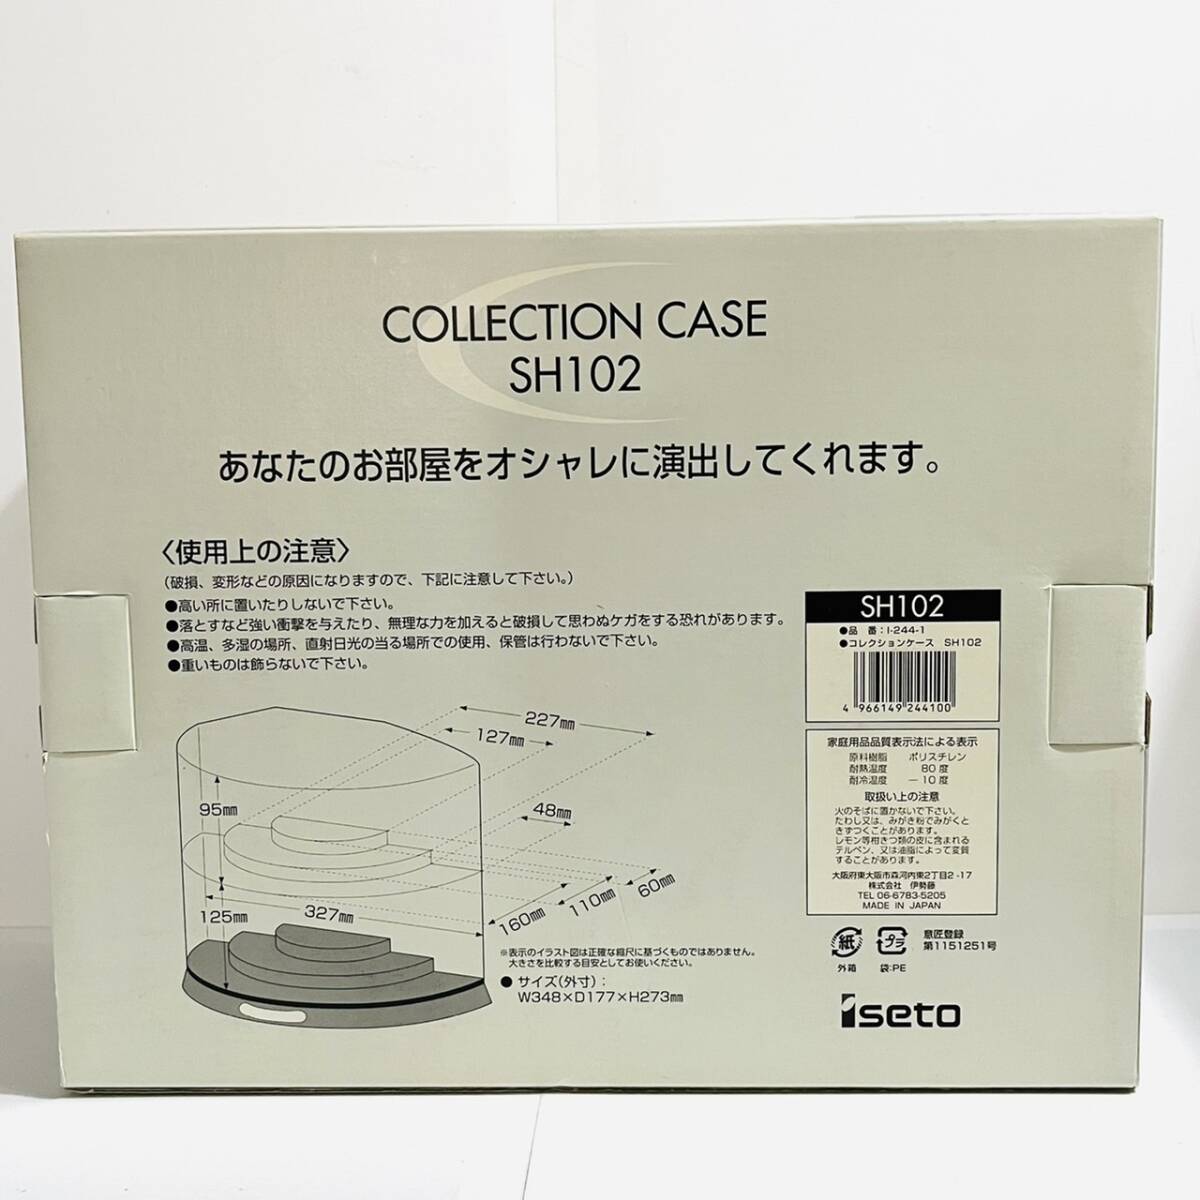  collection case 